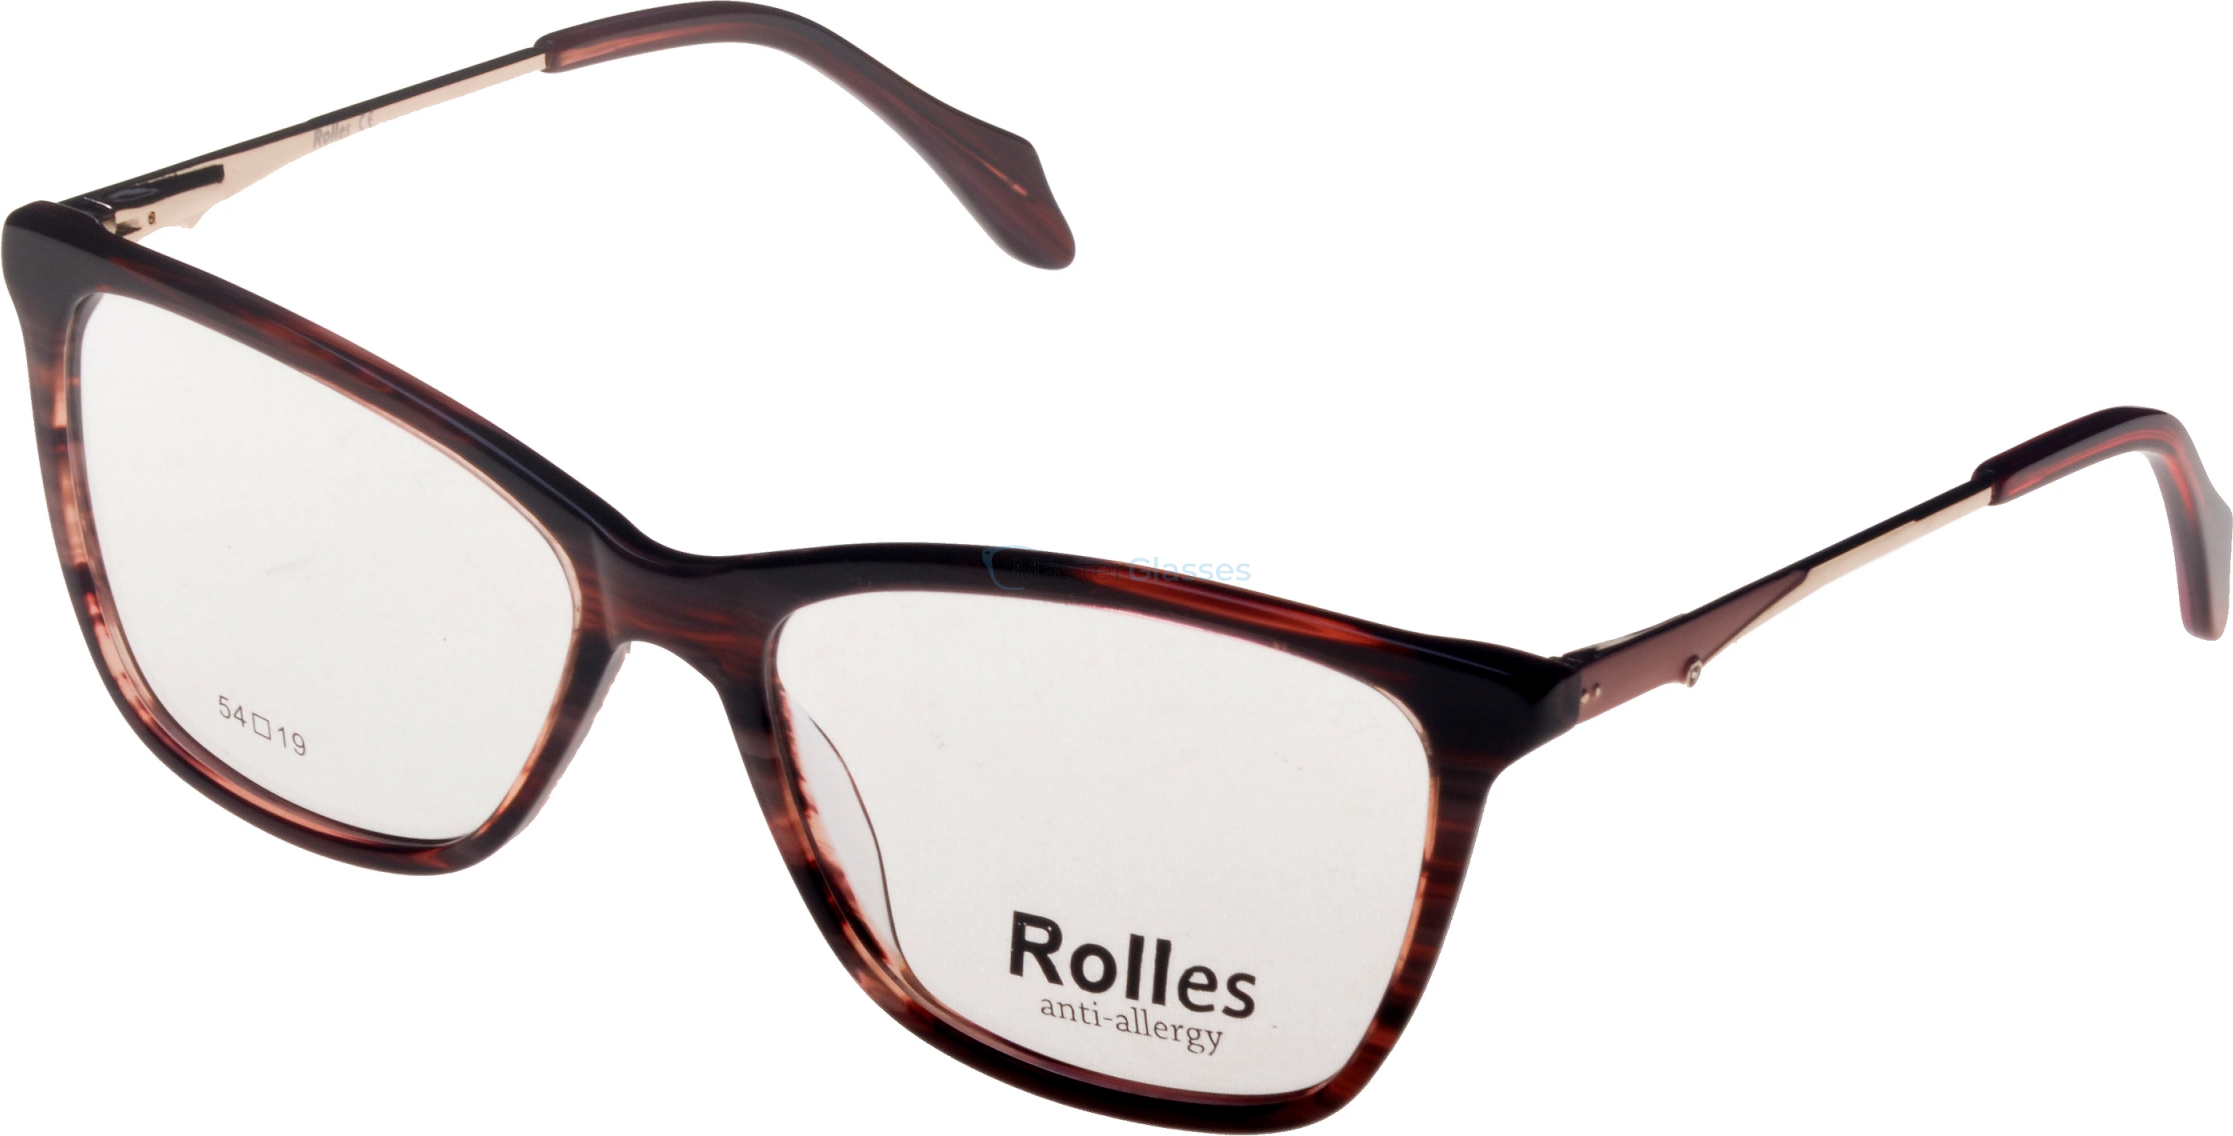  Rolles 725 03